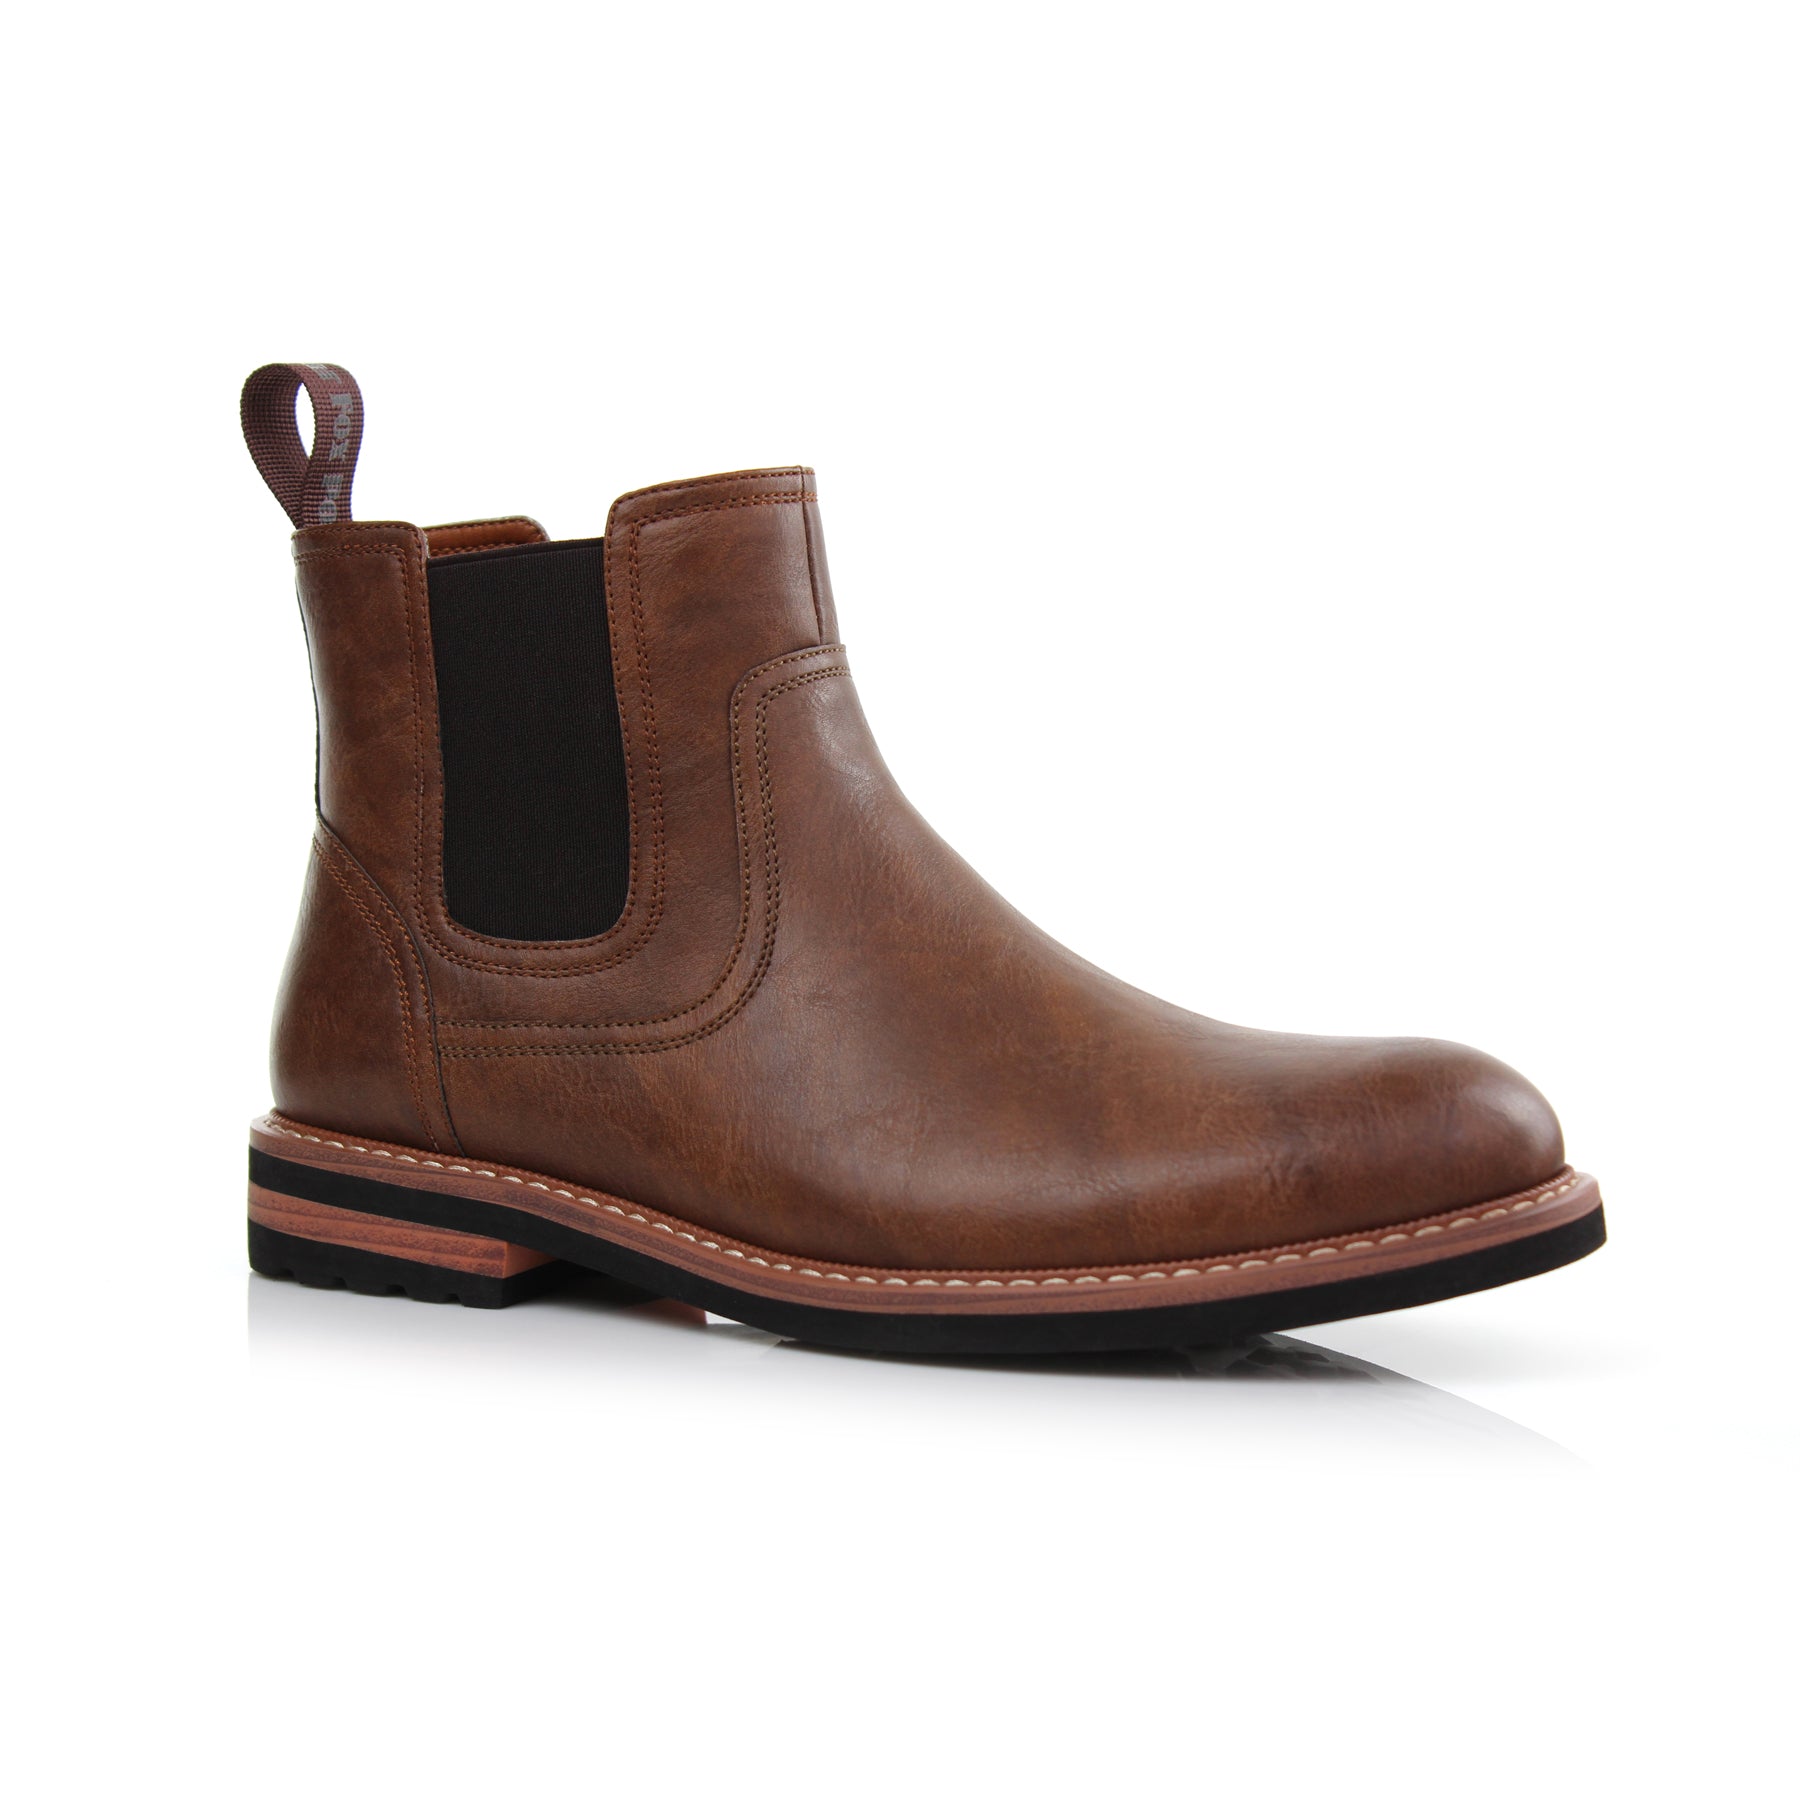 Walnut Brown Duncan Polar Fox Rambler Style Western Chelsea Boots with distressed pattern